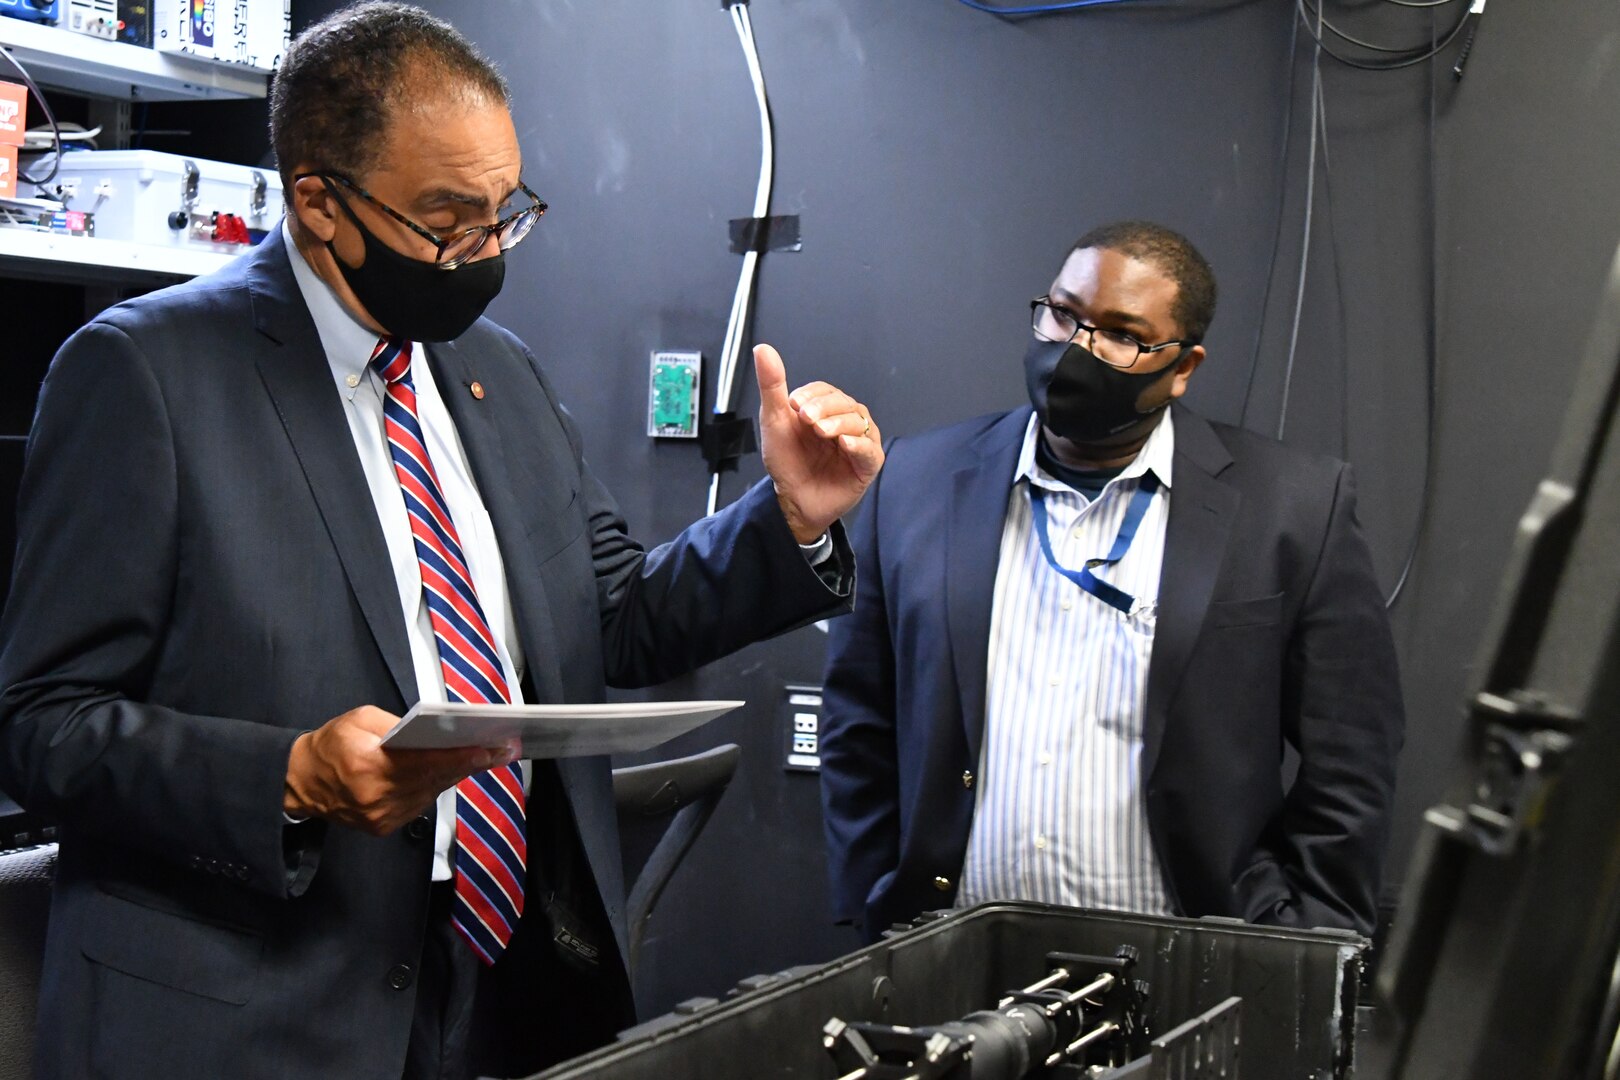 IMAGE: Dr. Victor McCrary from the University of the District of Columbia talks with Directed Energy scientist Dr. Chris Brown during a visit to Naval Surface Warfare Center Dahlgren Division, Oct. 22.